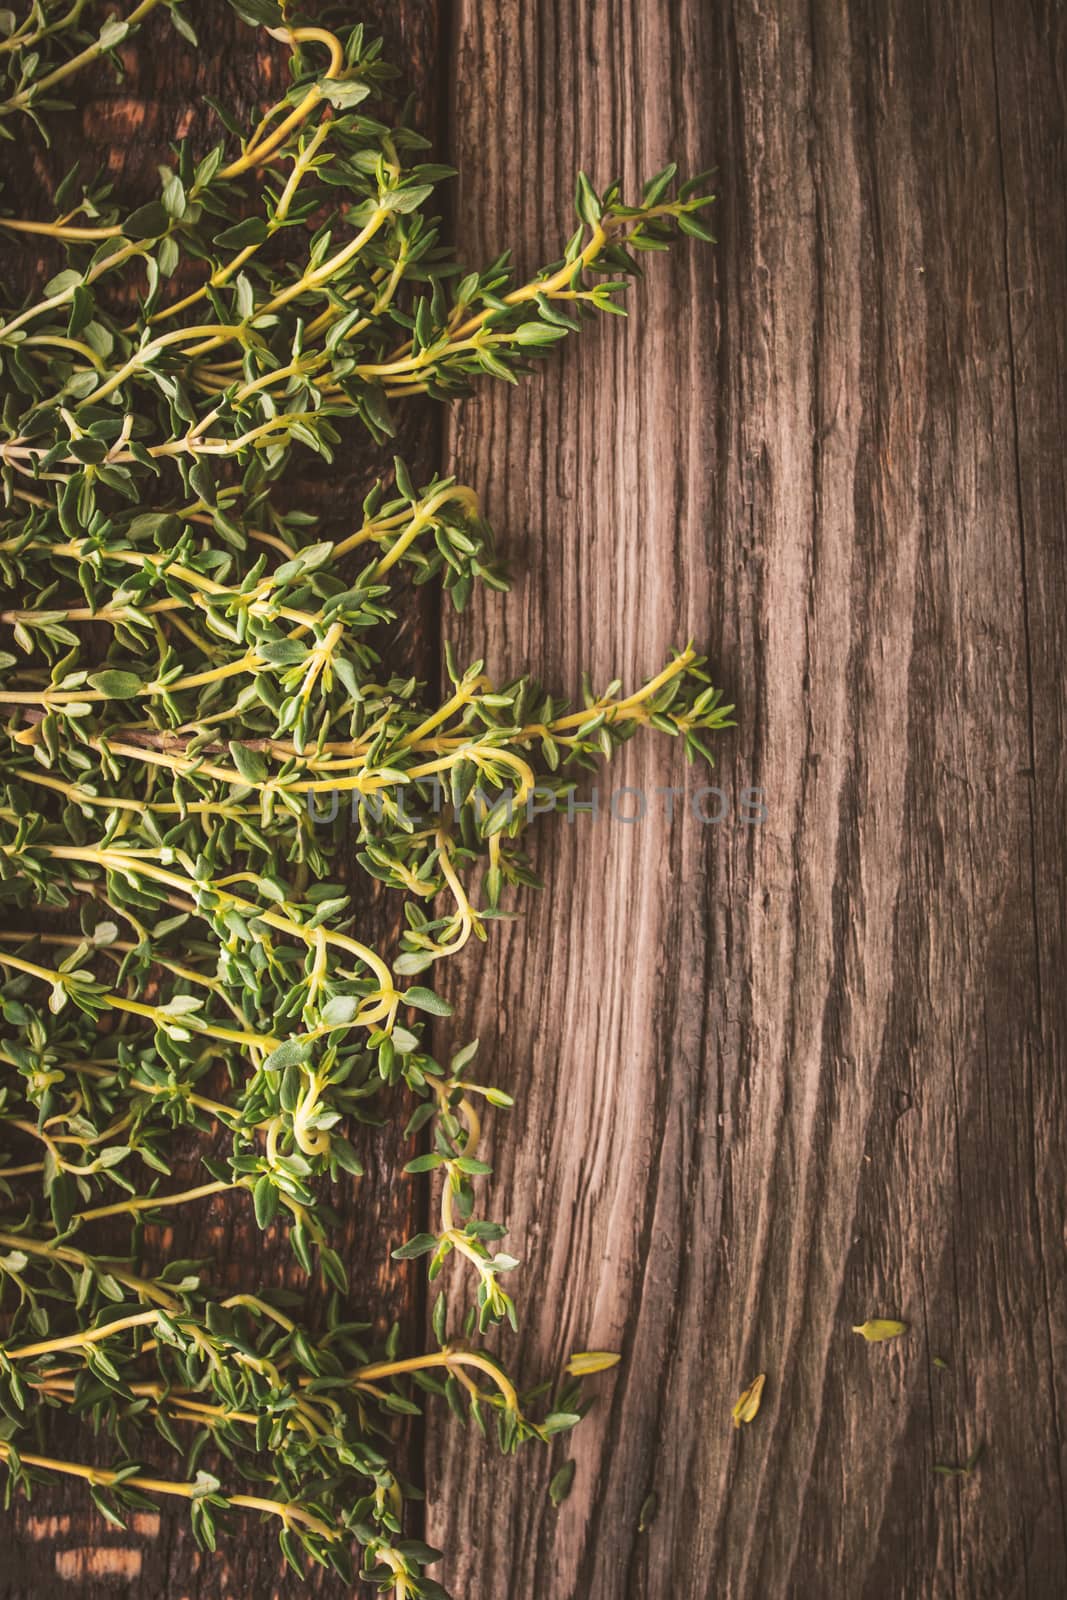 Thyme at the left of the wooden background vertical